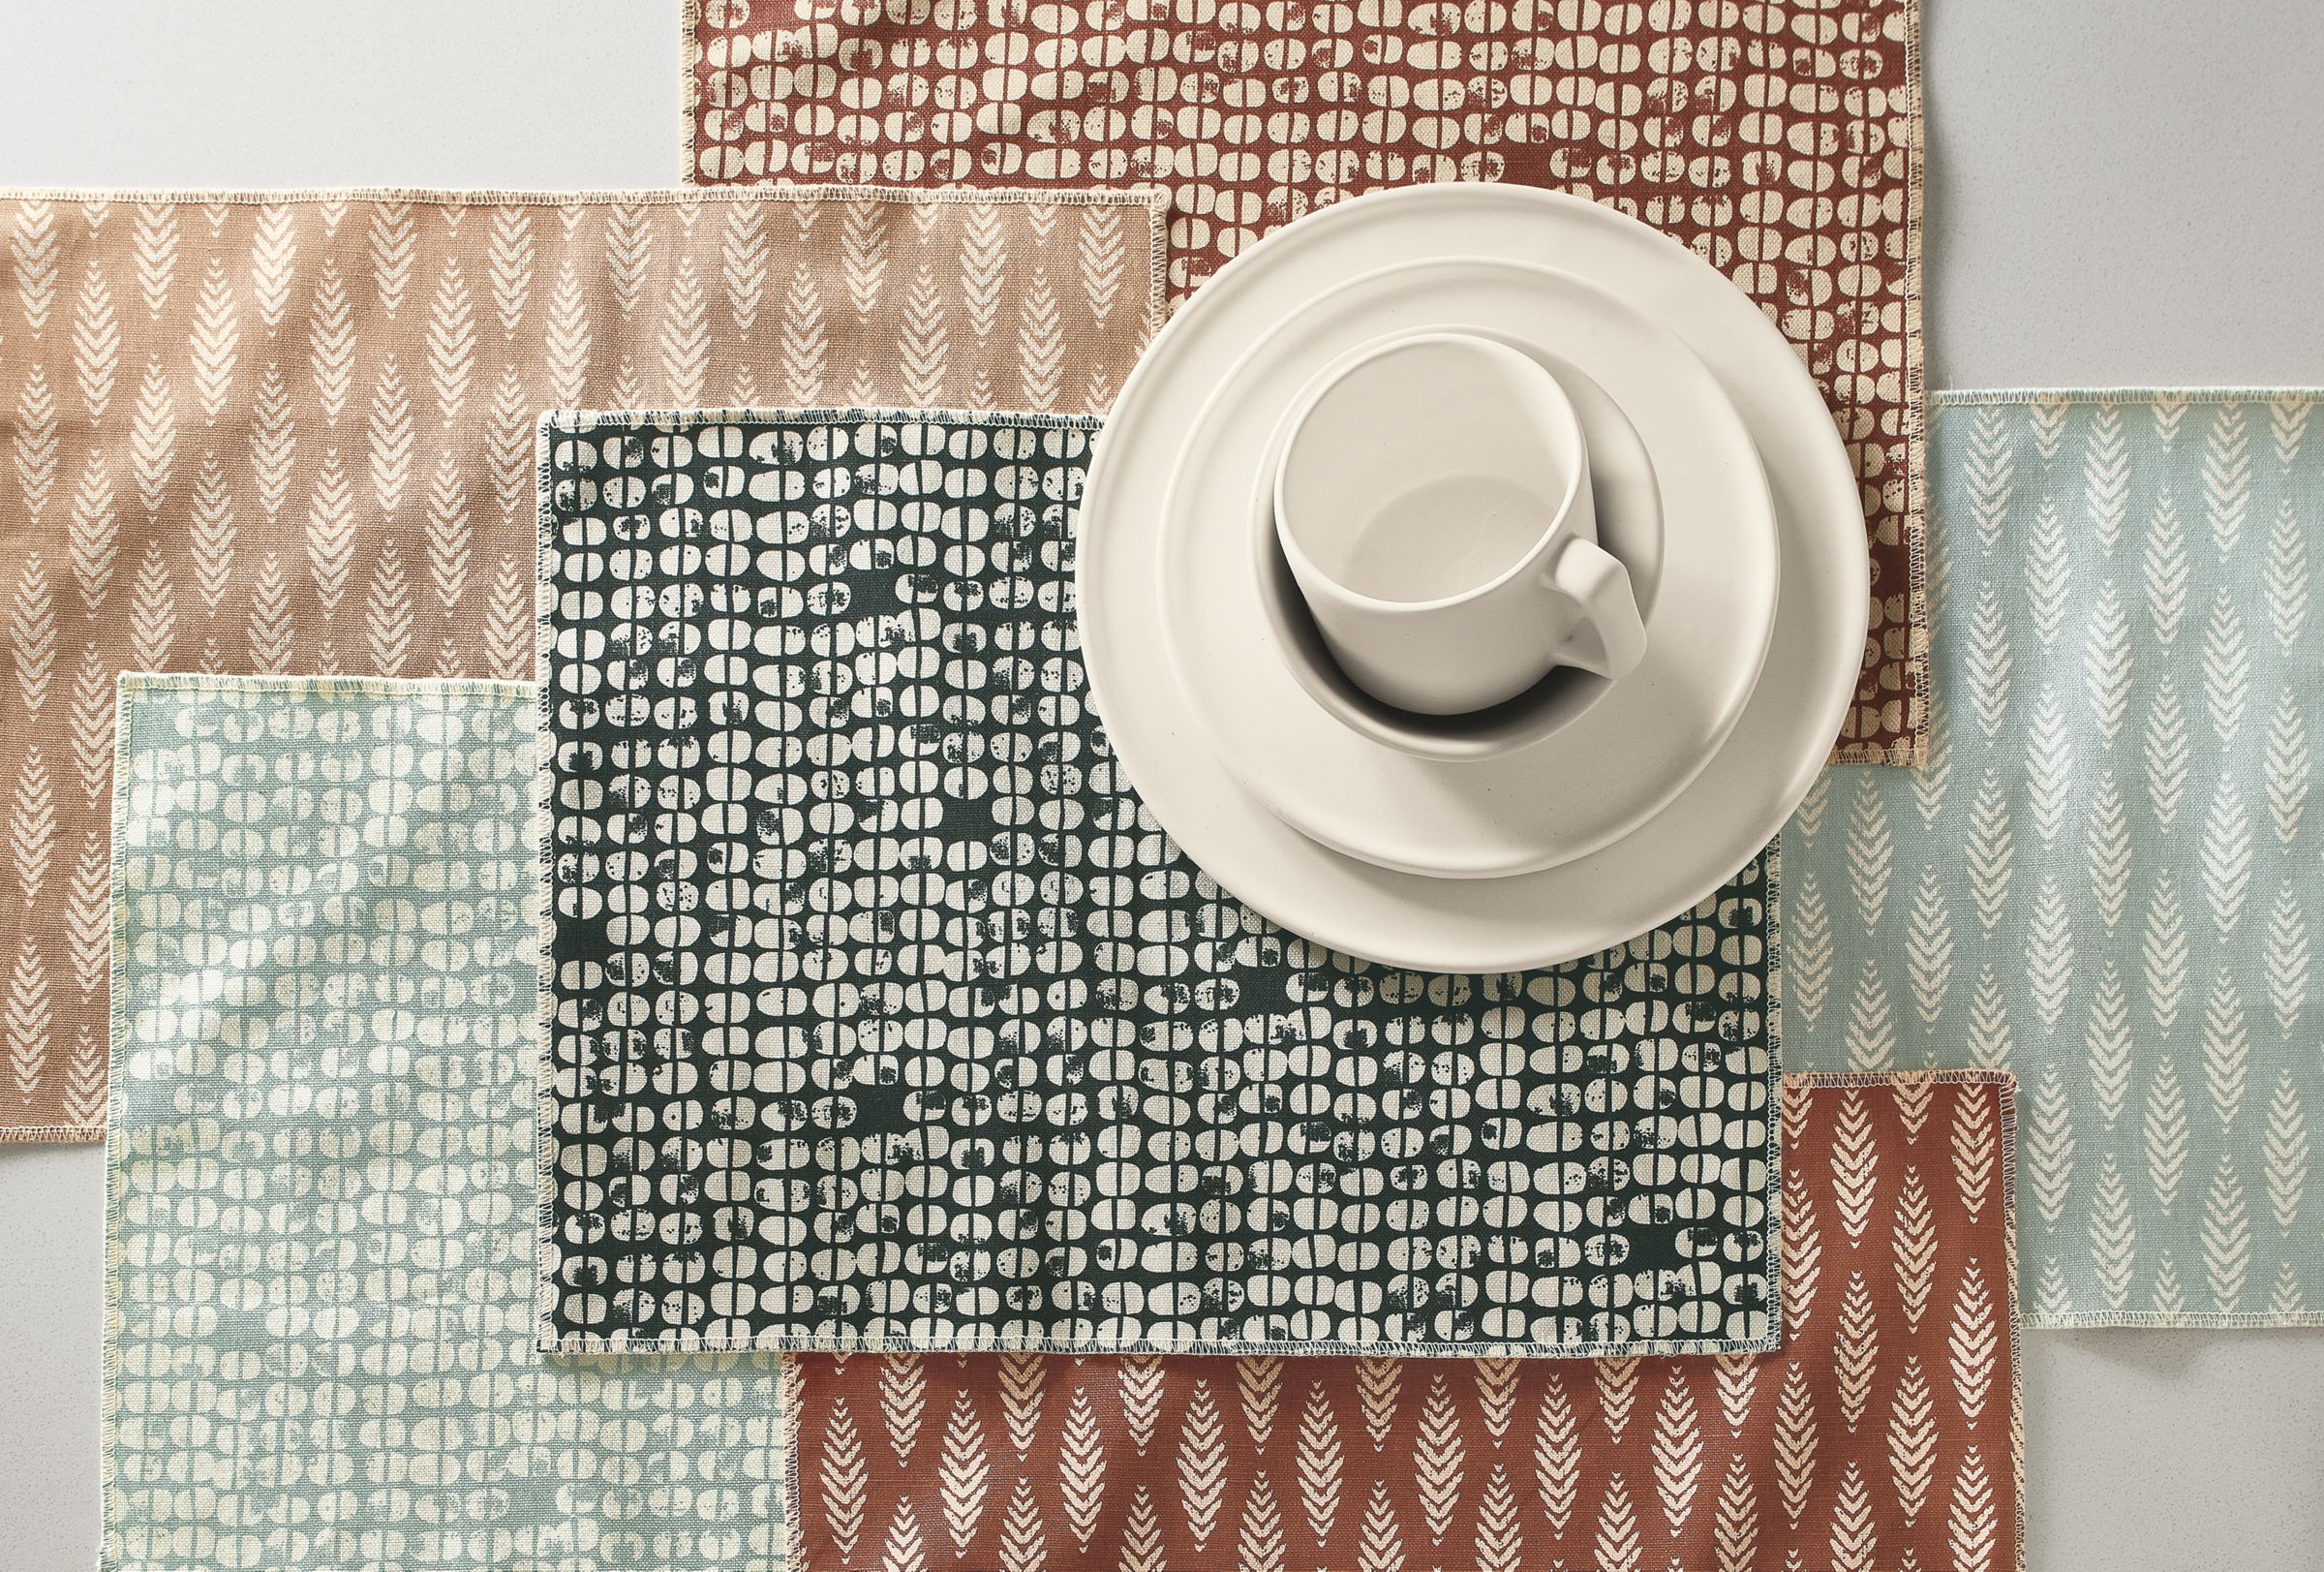 tabletop with 3 astoria placemats and 3 ashwin placemats layered.